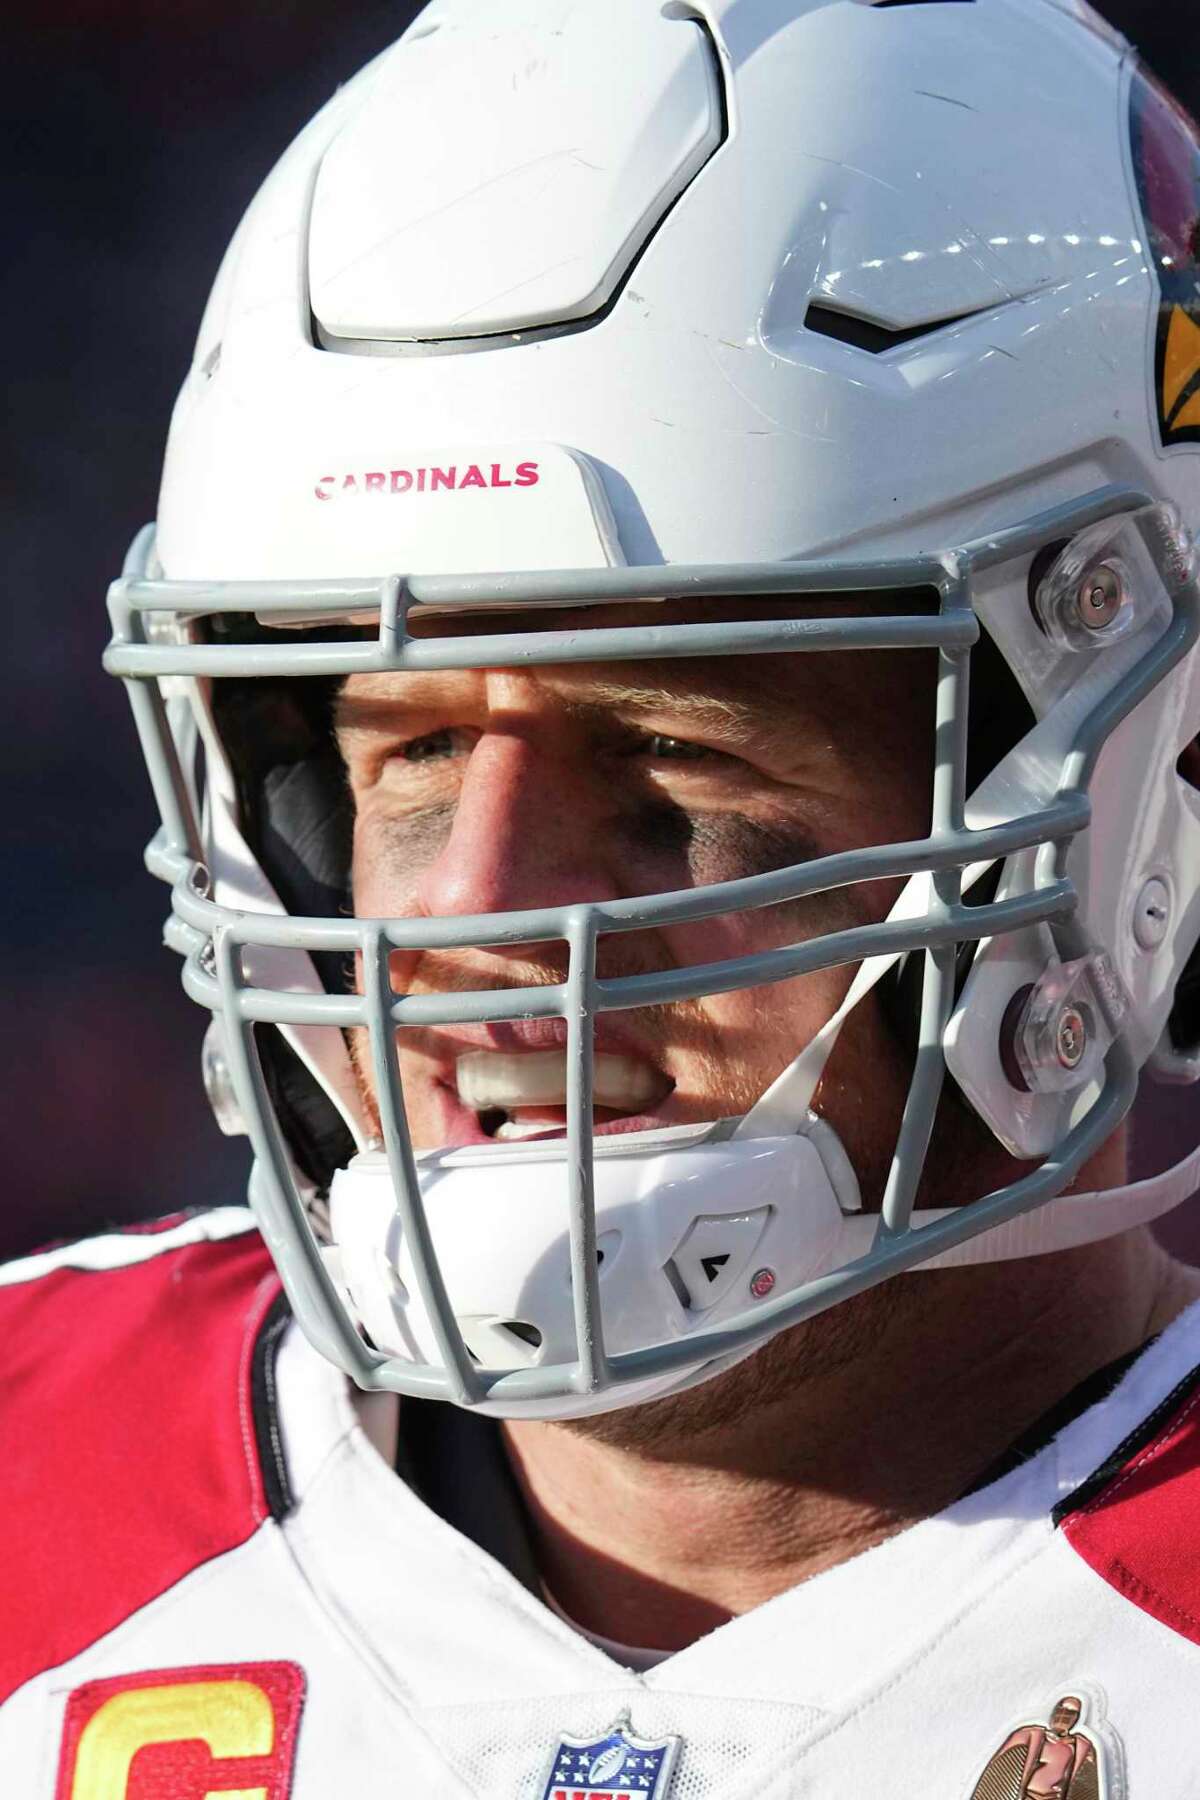 The last NFL game for Arizona Cardinals defensive end J.J. Watt will be against the 49ers.